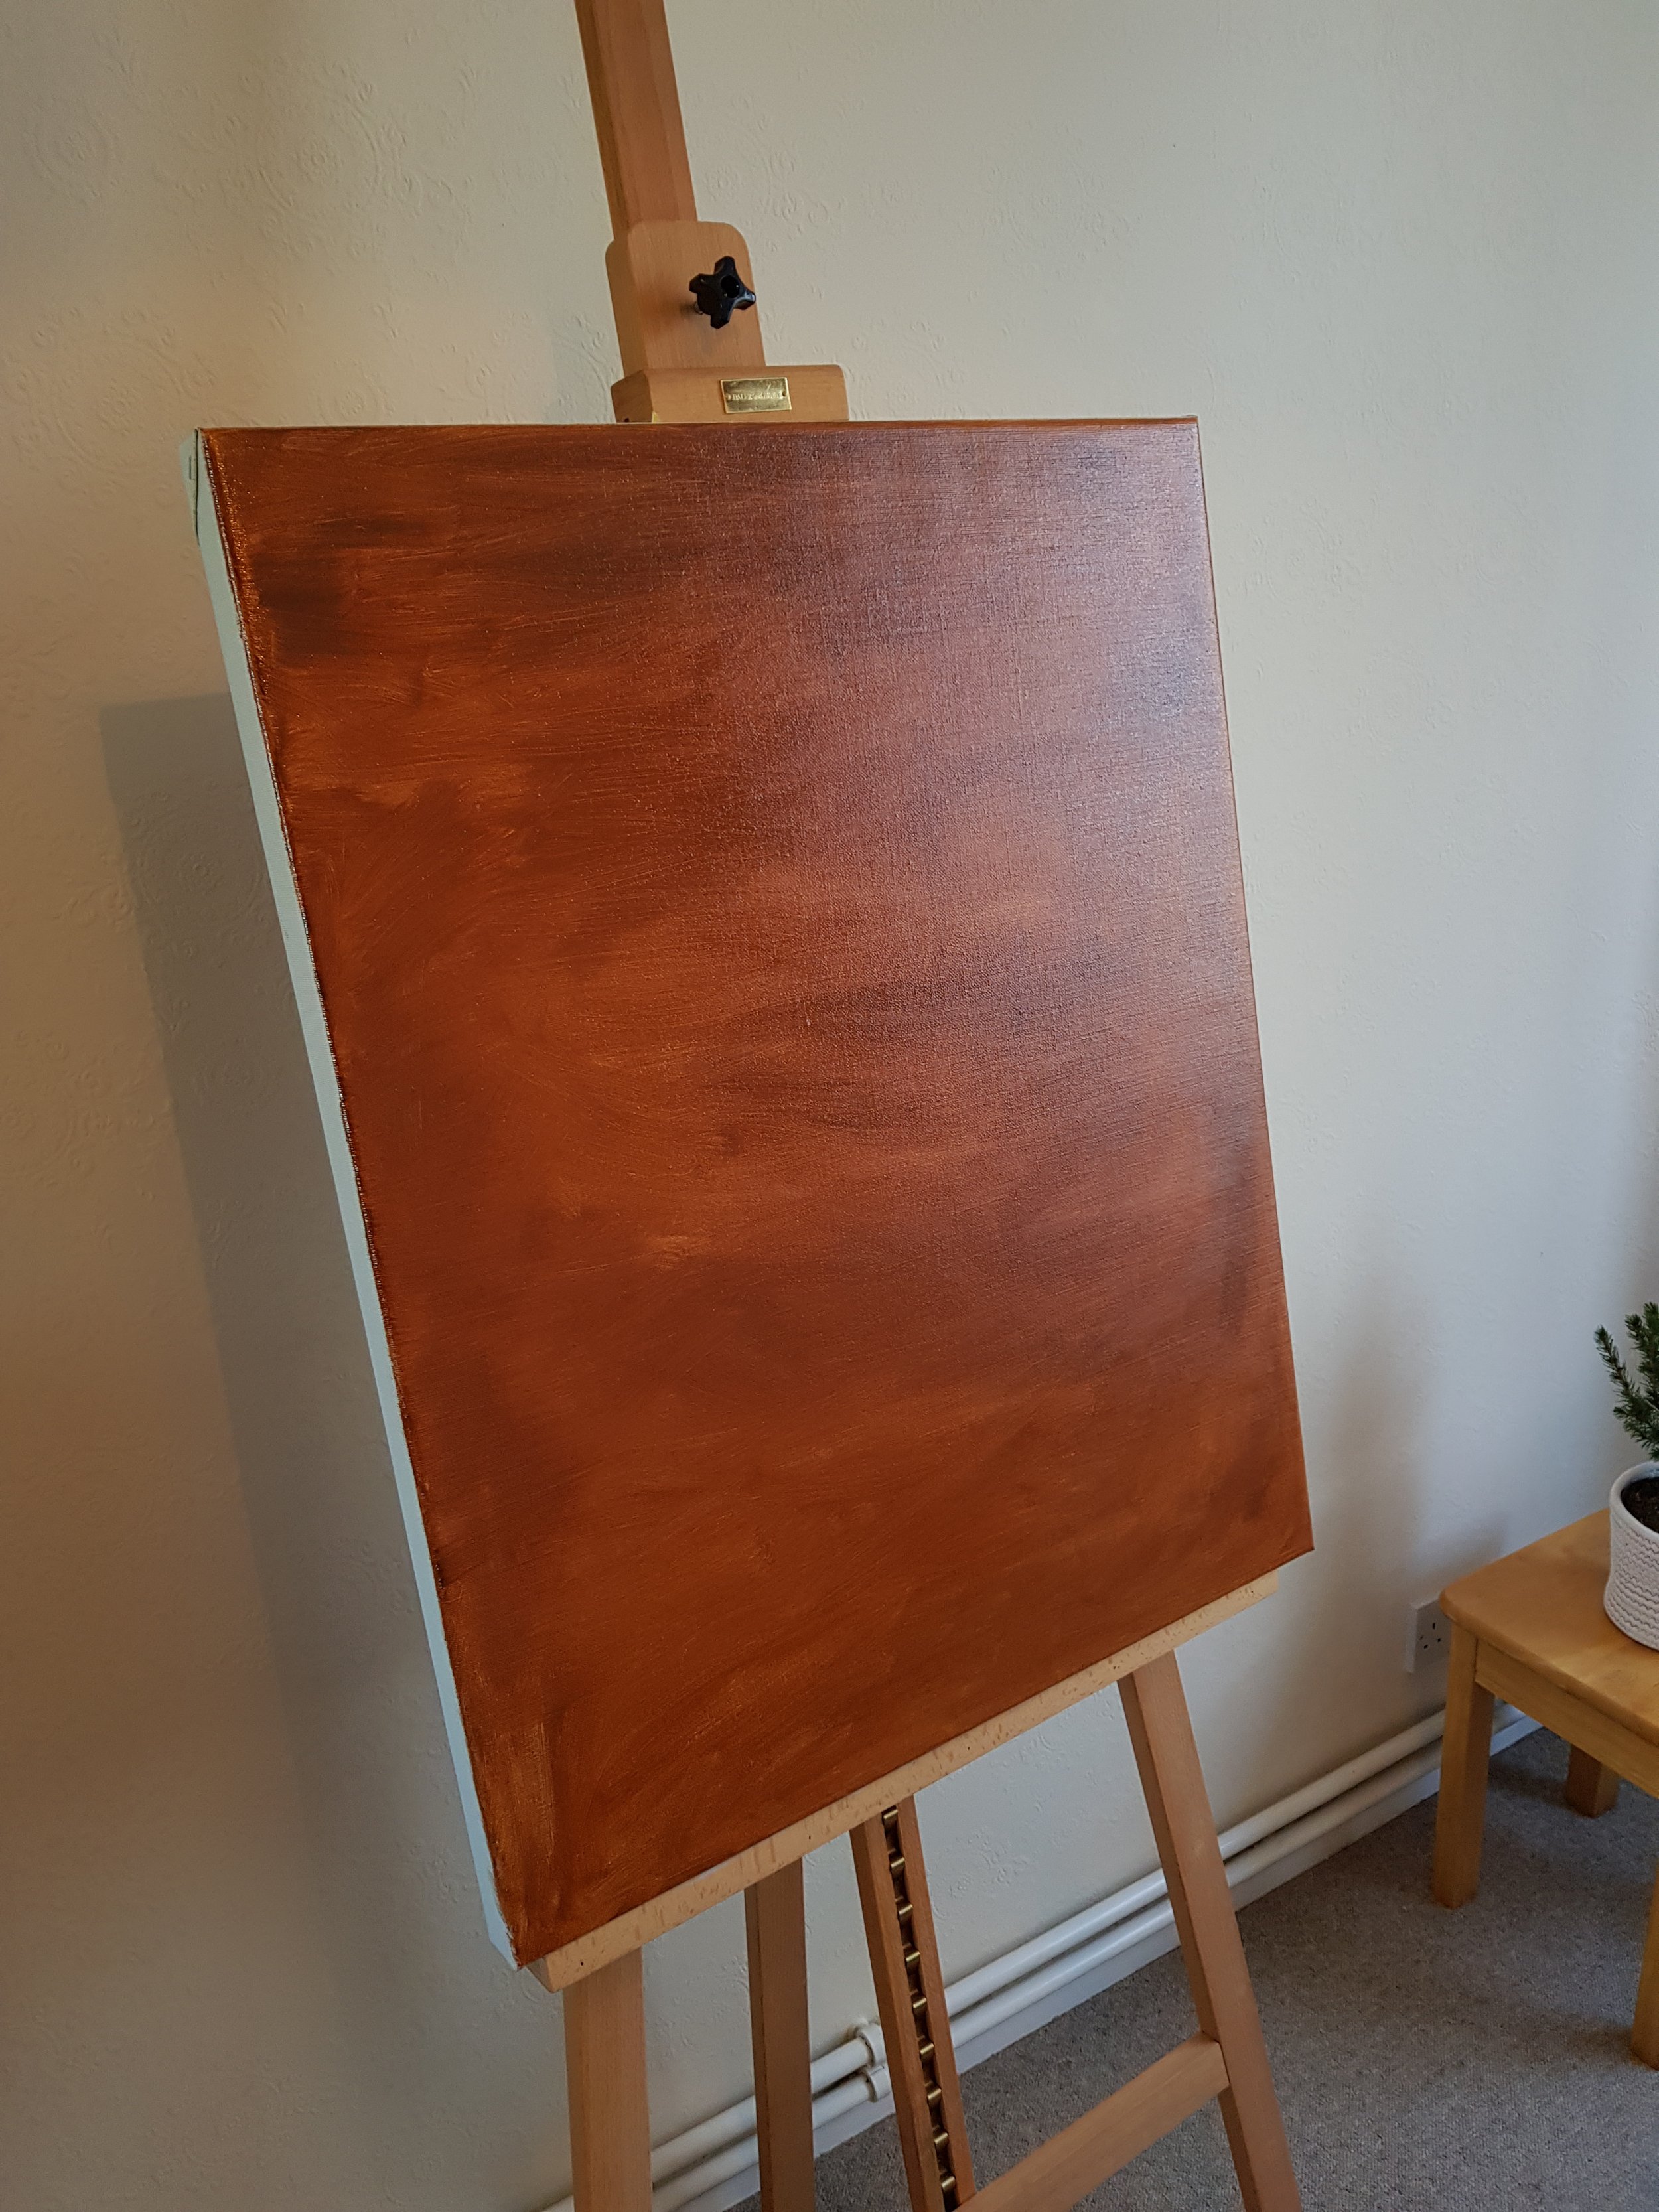 Using a combination of red bole, burnt umber, and ivory black to achieve the correct tonal quality